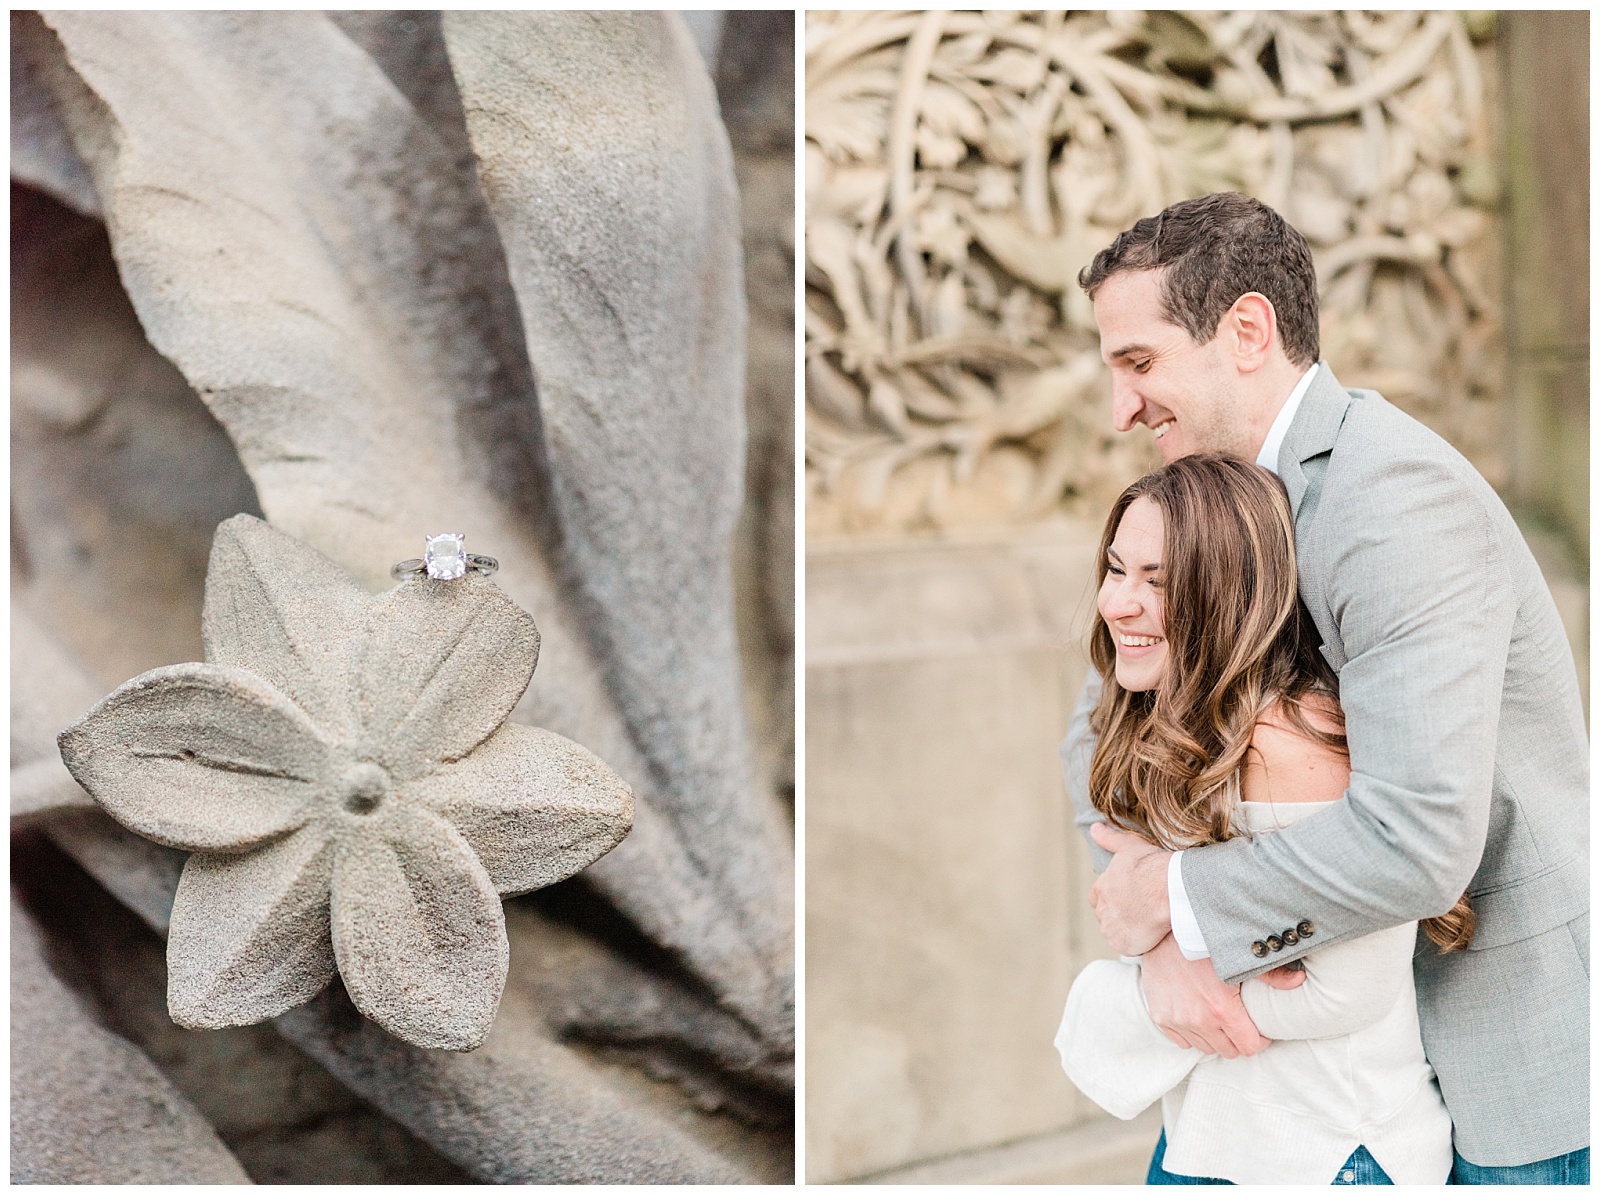 Bethesda Terrace,Central Park,City,Engagement Ring,Engagement Session,Fall,NYC,Nature,New York,Wedding Photographer,